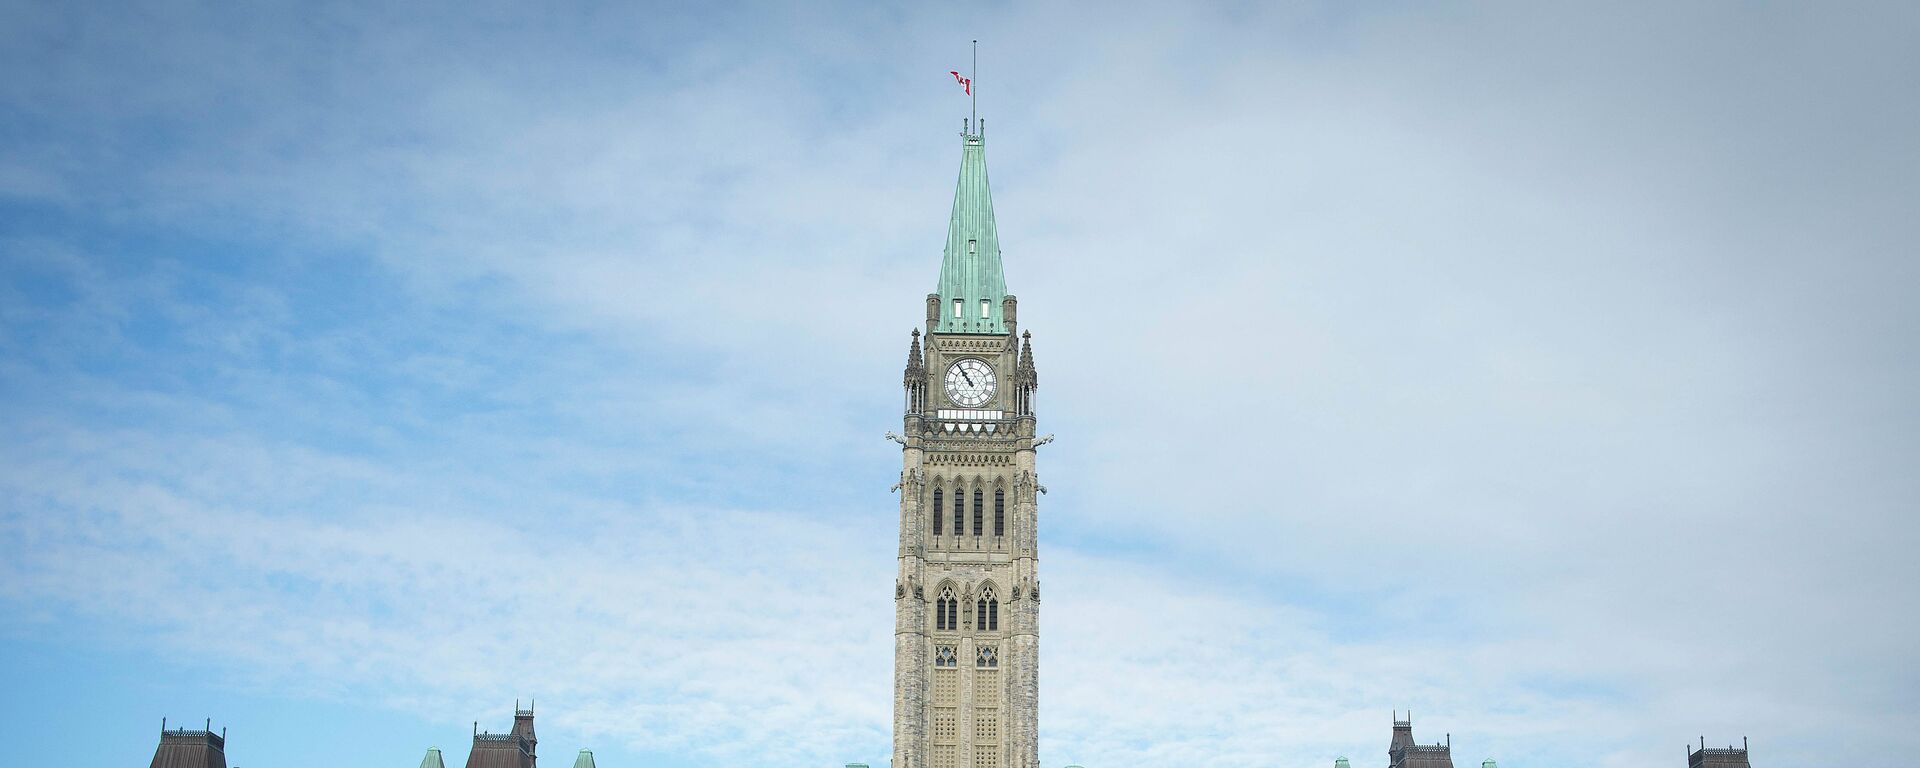 The Canadian Parliament is seen on October 23, 2014, in Ottawa, the day after multiple shootings in the capital city and Parliament buildings left a soldier dead and others wounded - Sputnik International, 1920, 26.04.2022